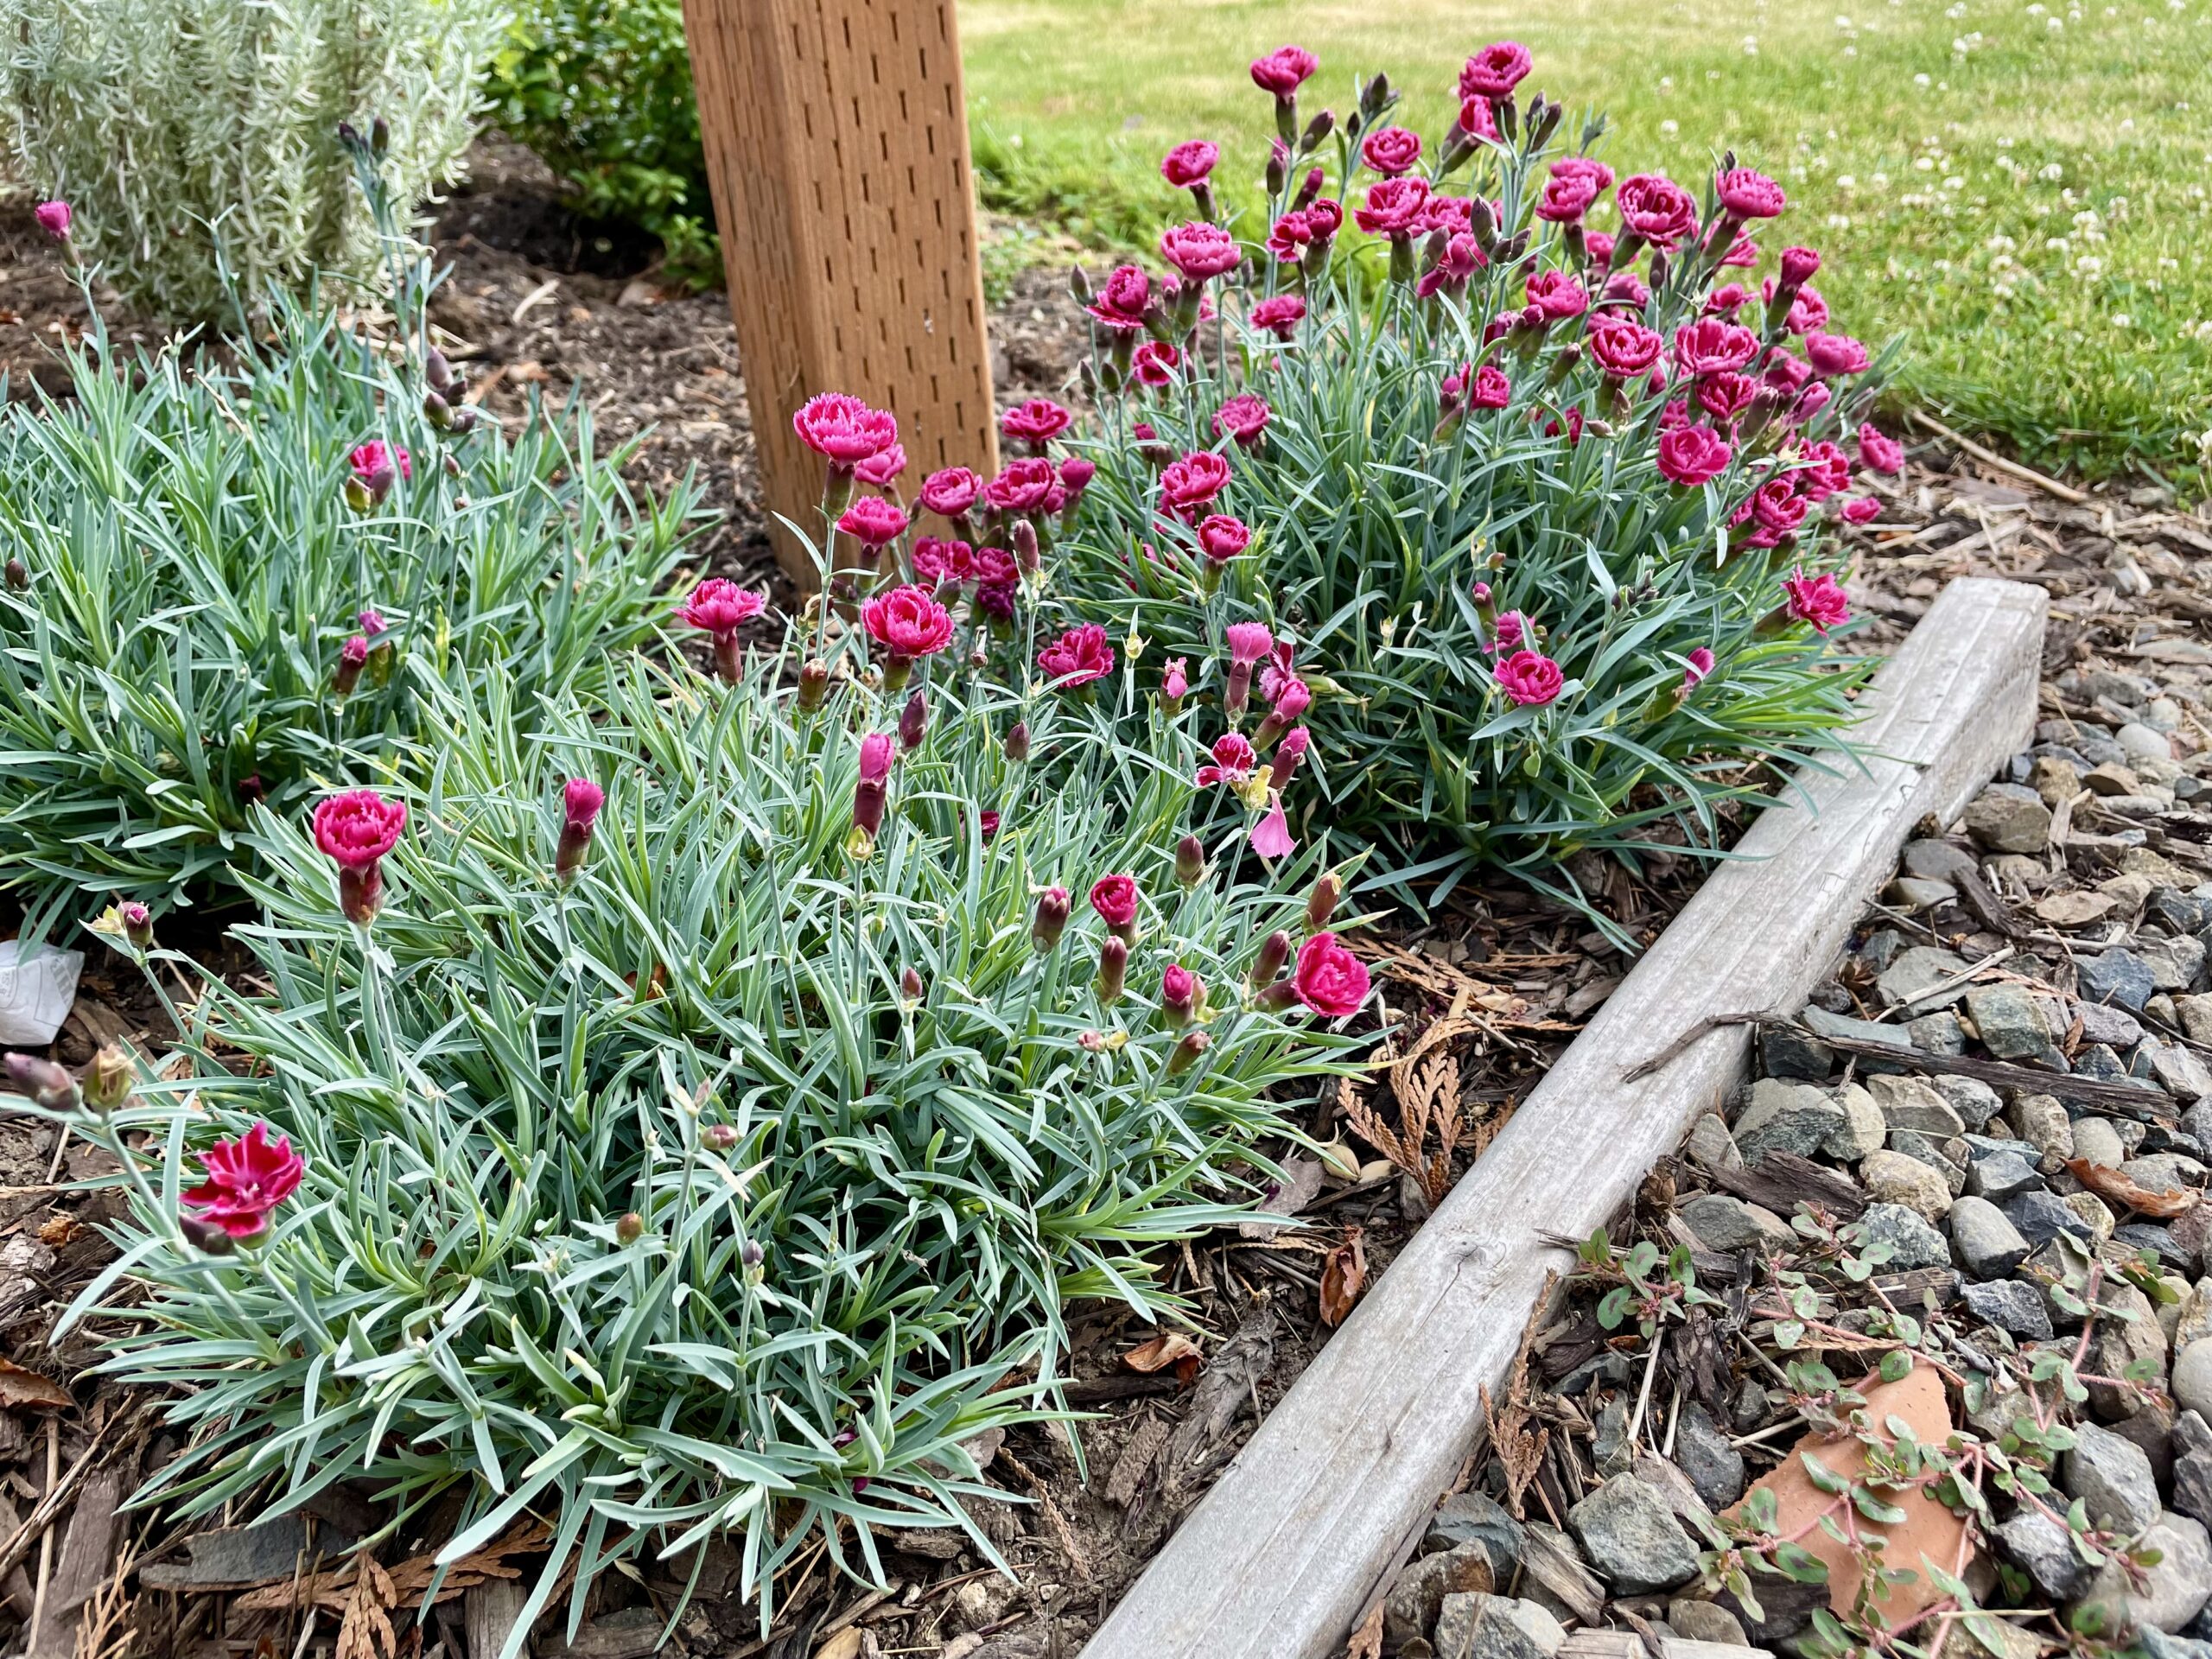 Flowering red-pink plants, with blooms heavy on the right clump and light on the left clump